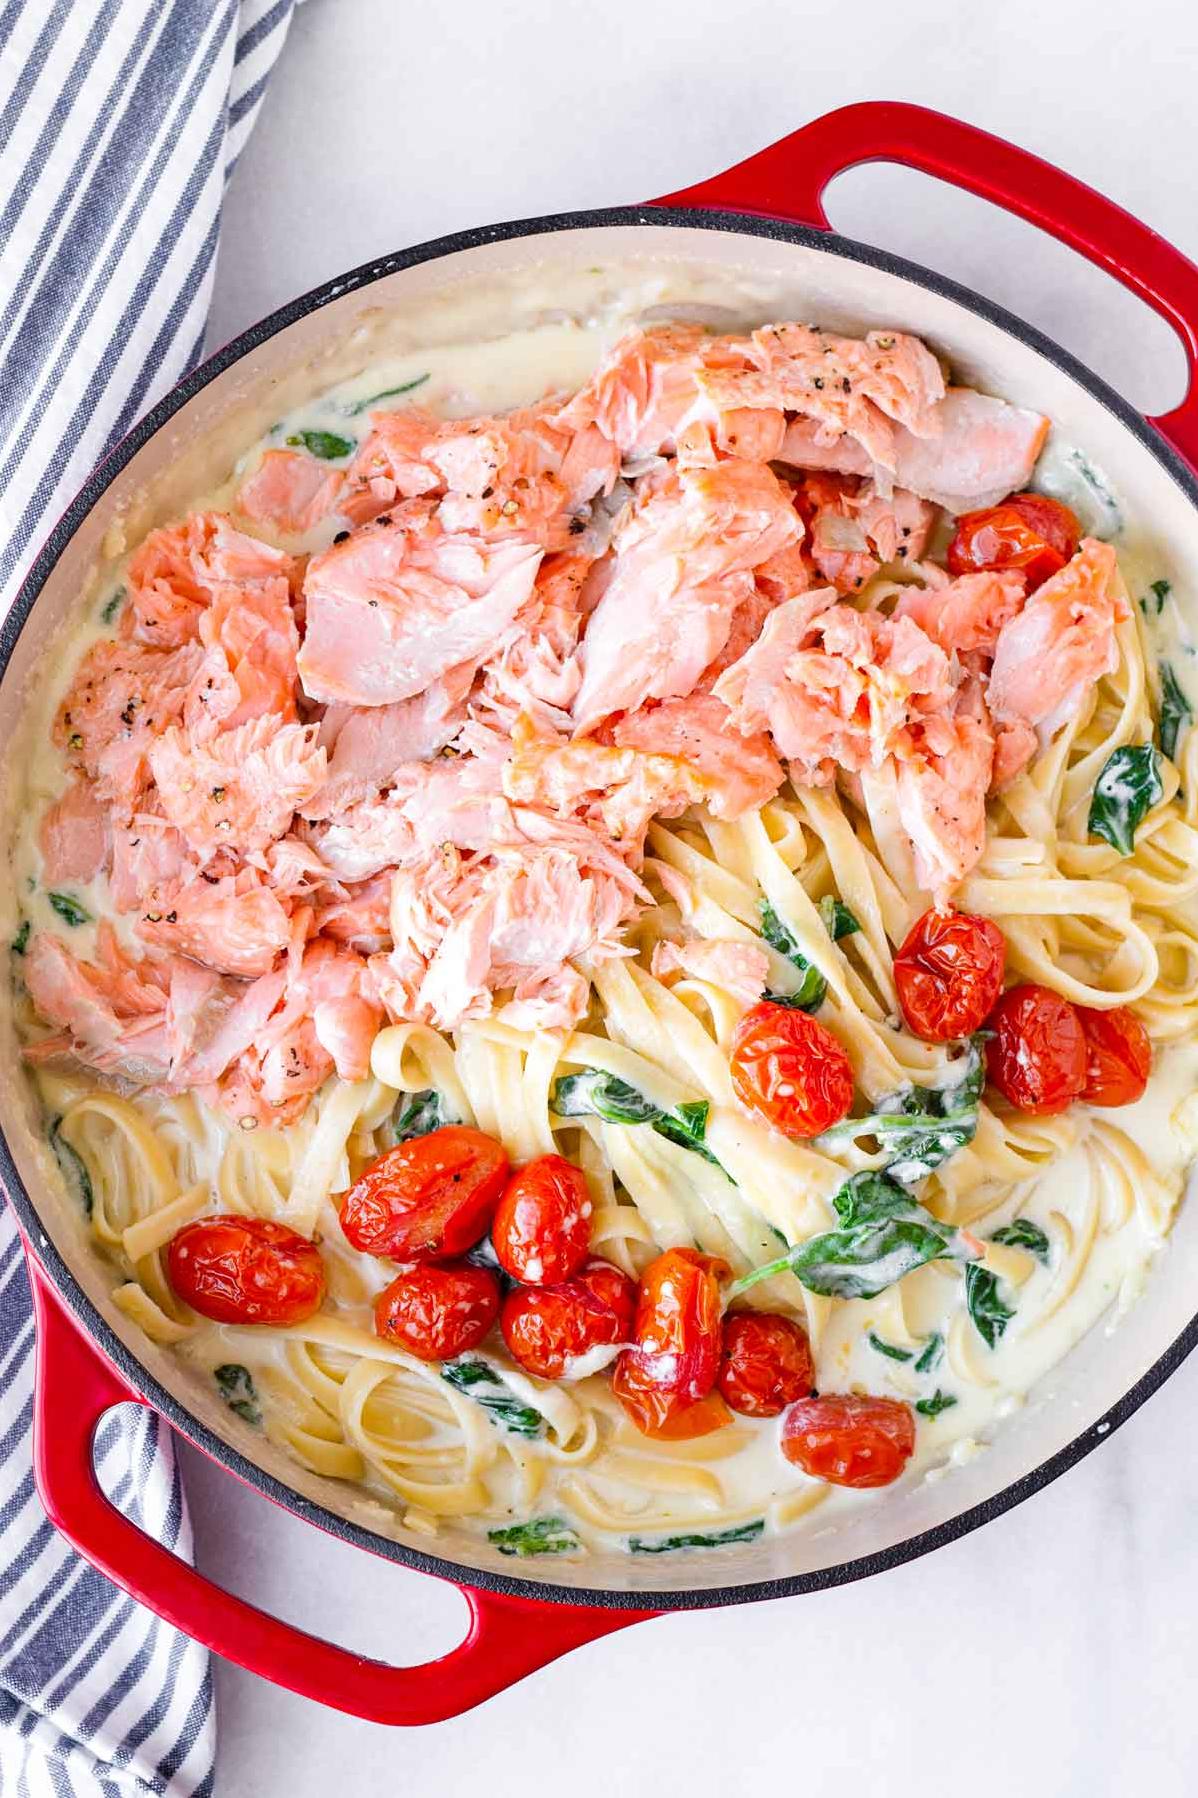  The perfect party dish: my Creamy Smoked Salmon Pasta is sure to wow your guests!